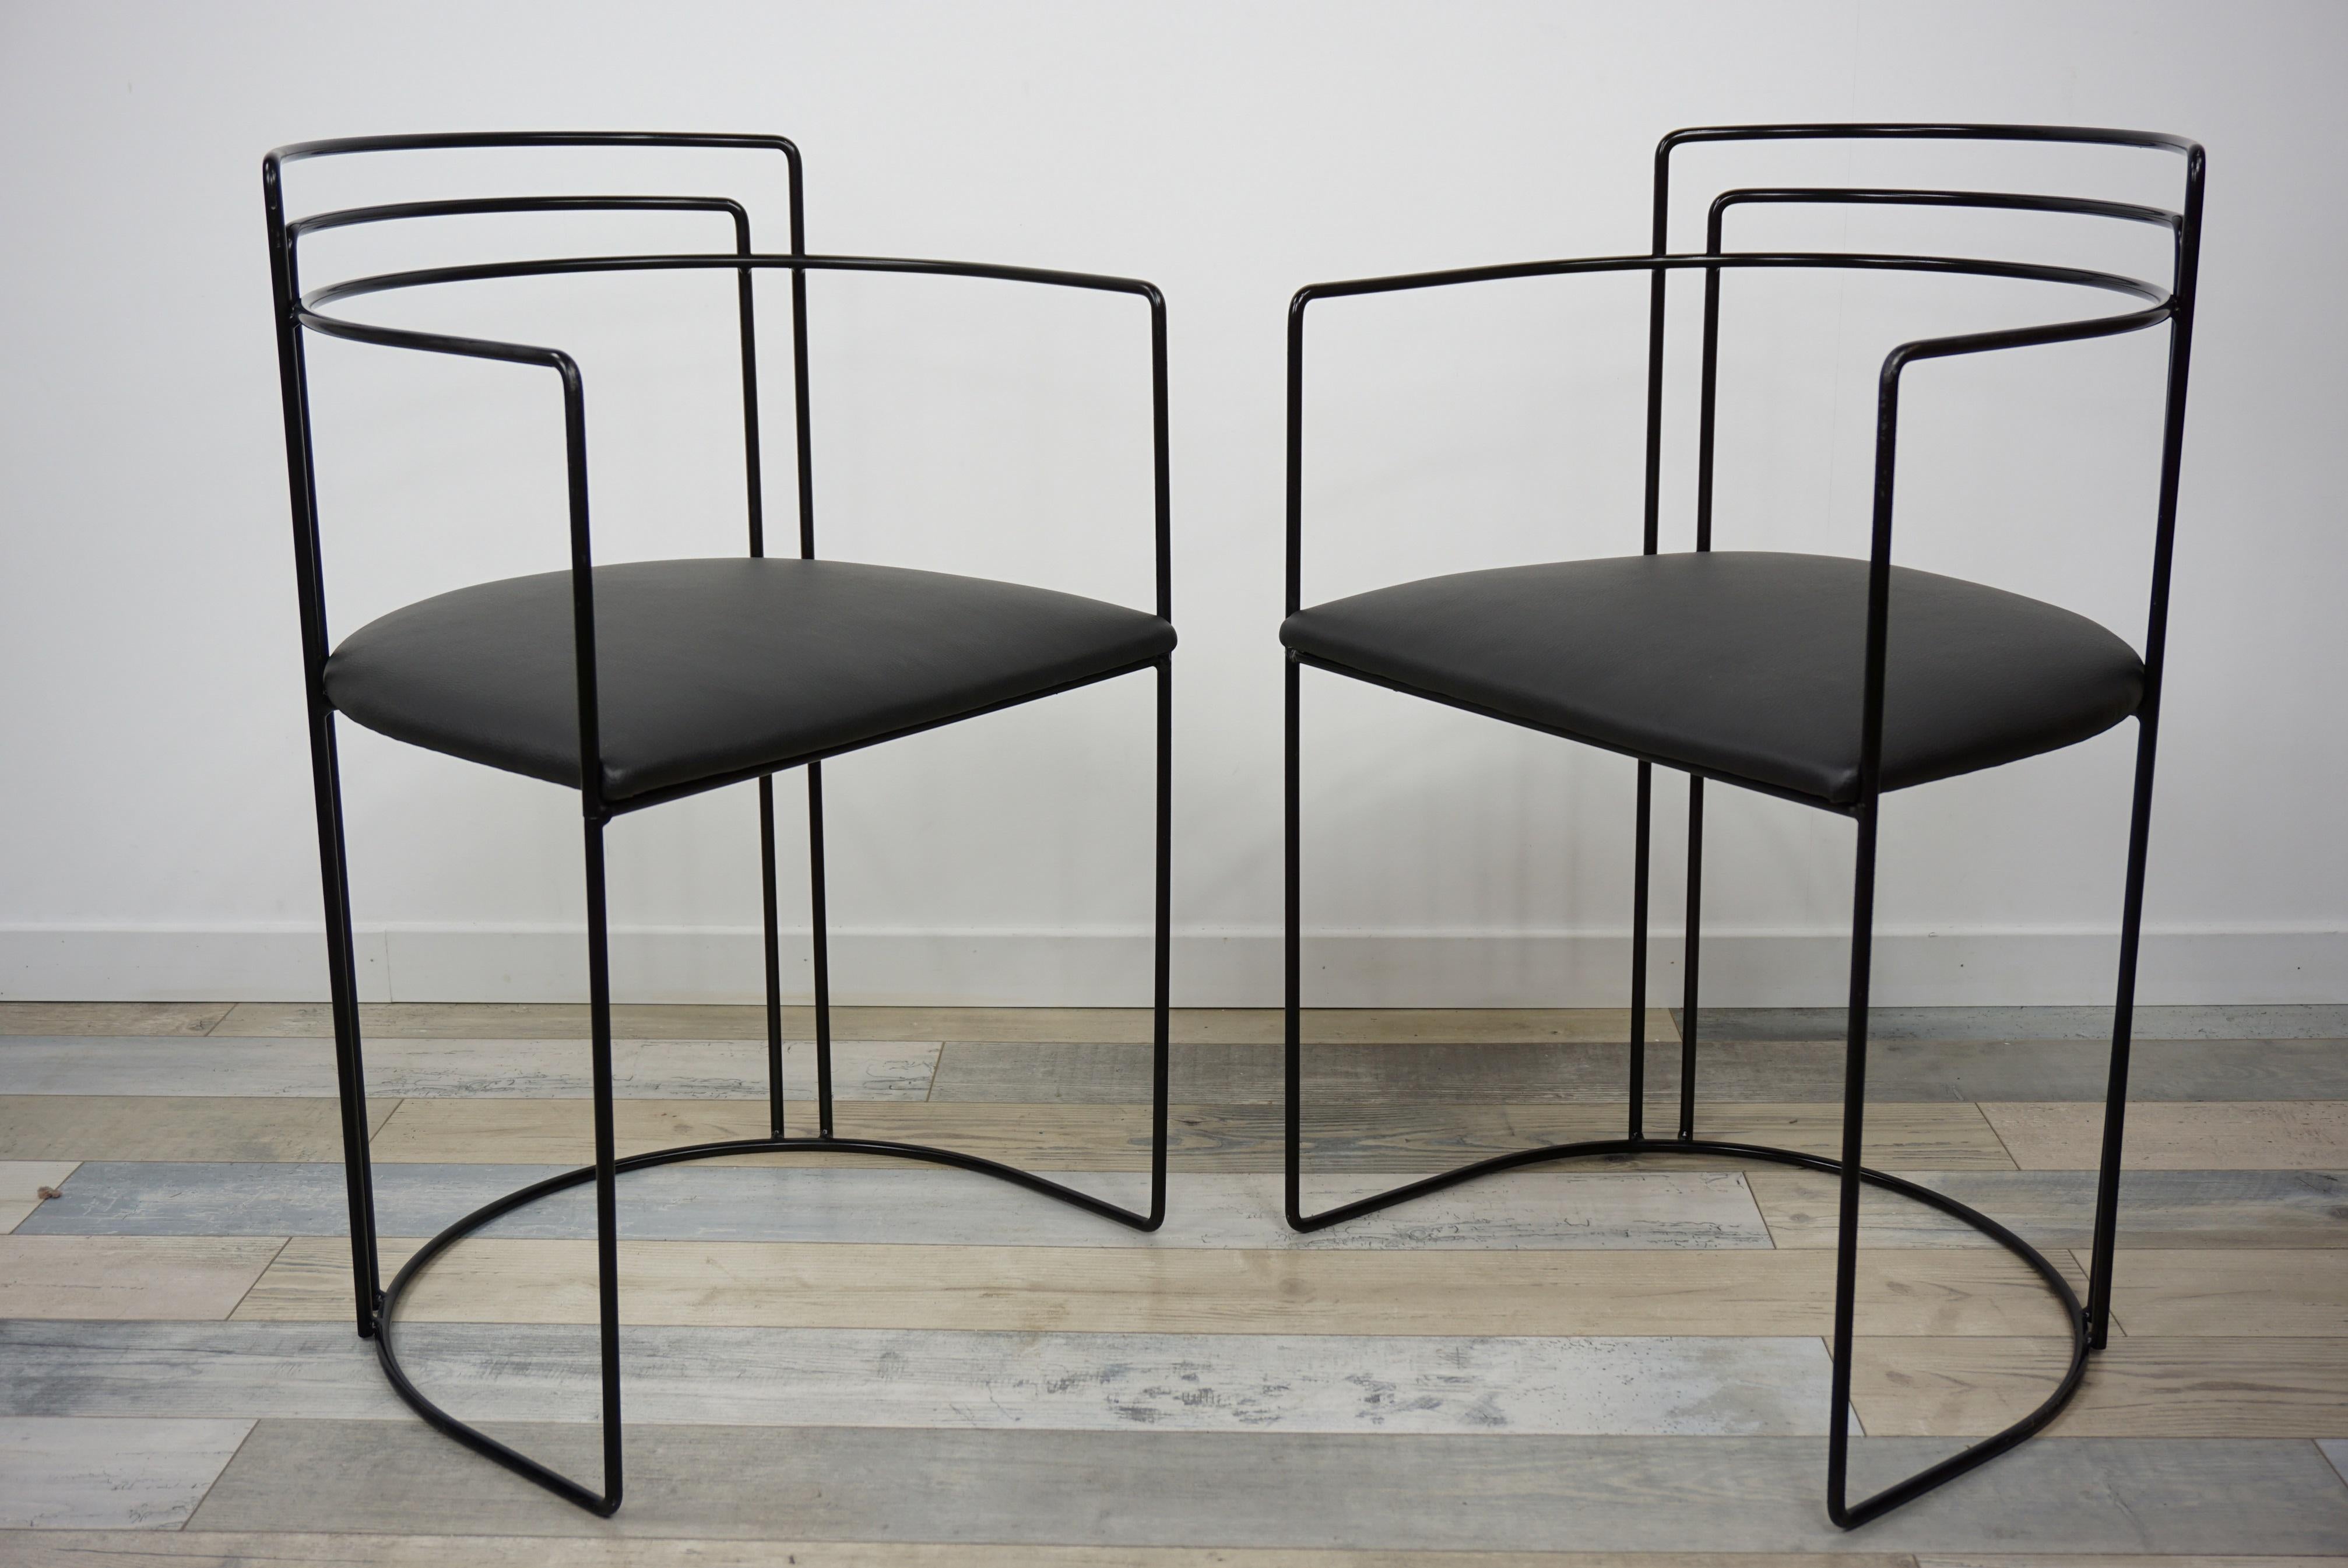 Modern 1980s Italian Design and Memphis Milano Style All in Black Pair of Chairs